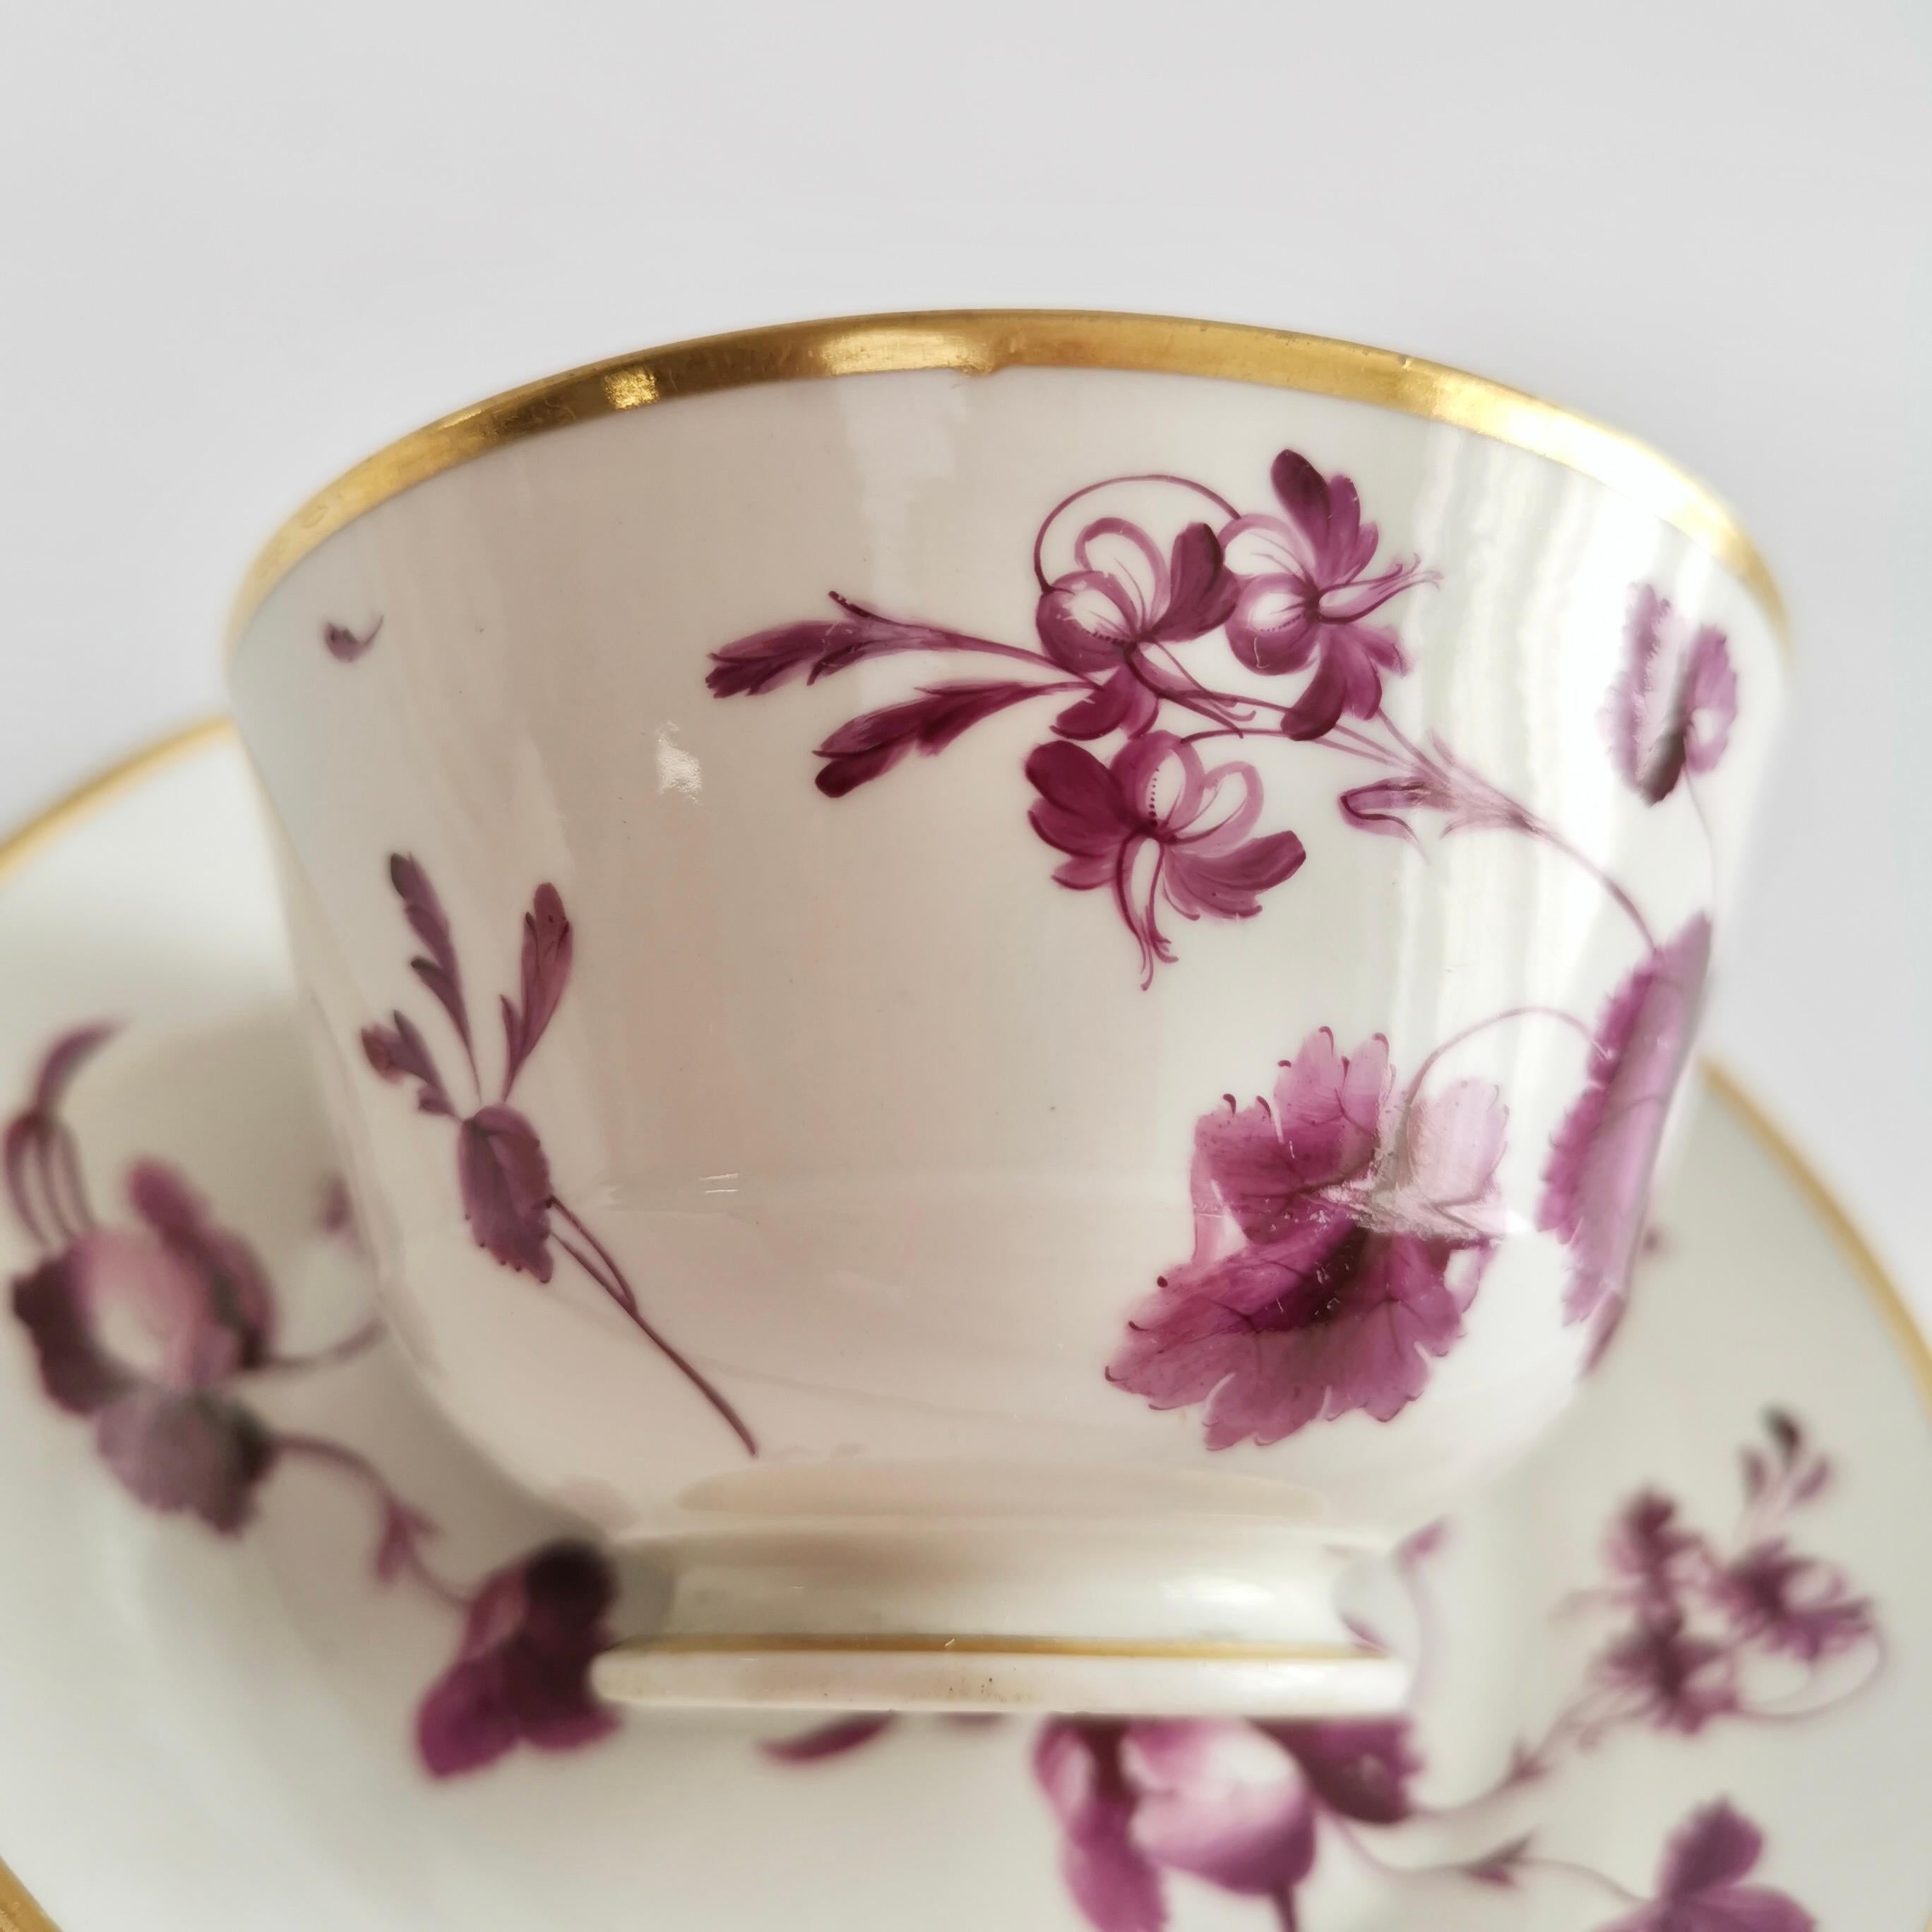 Early 19th Century Flight Barr and Barr Teacup, White with Puce Flowers, Regency ca 1815